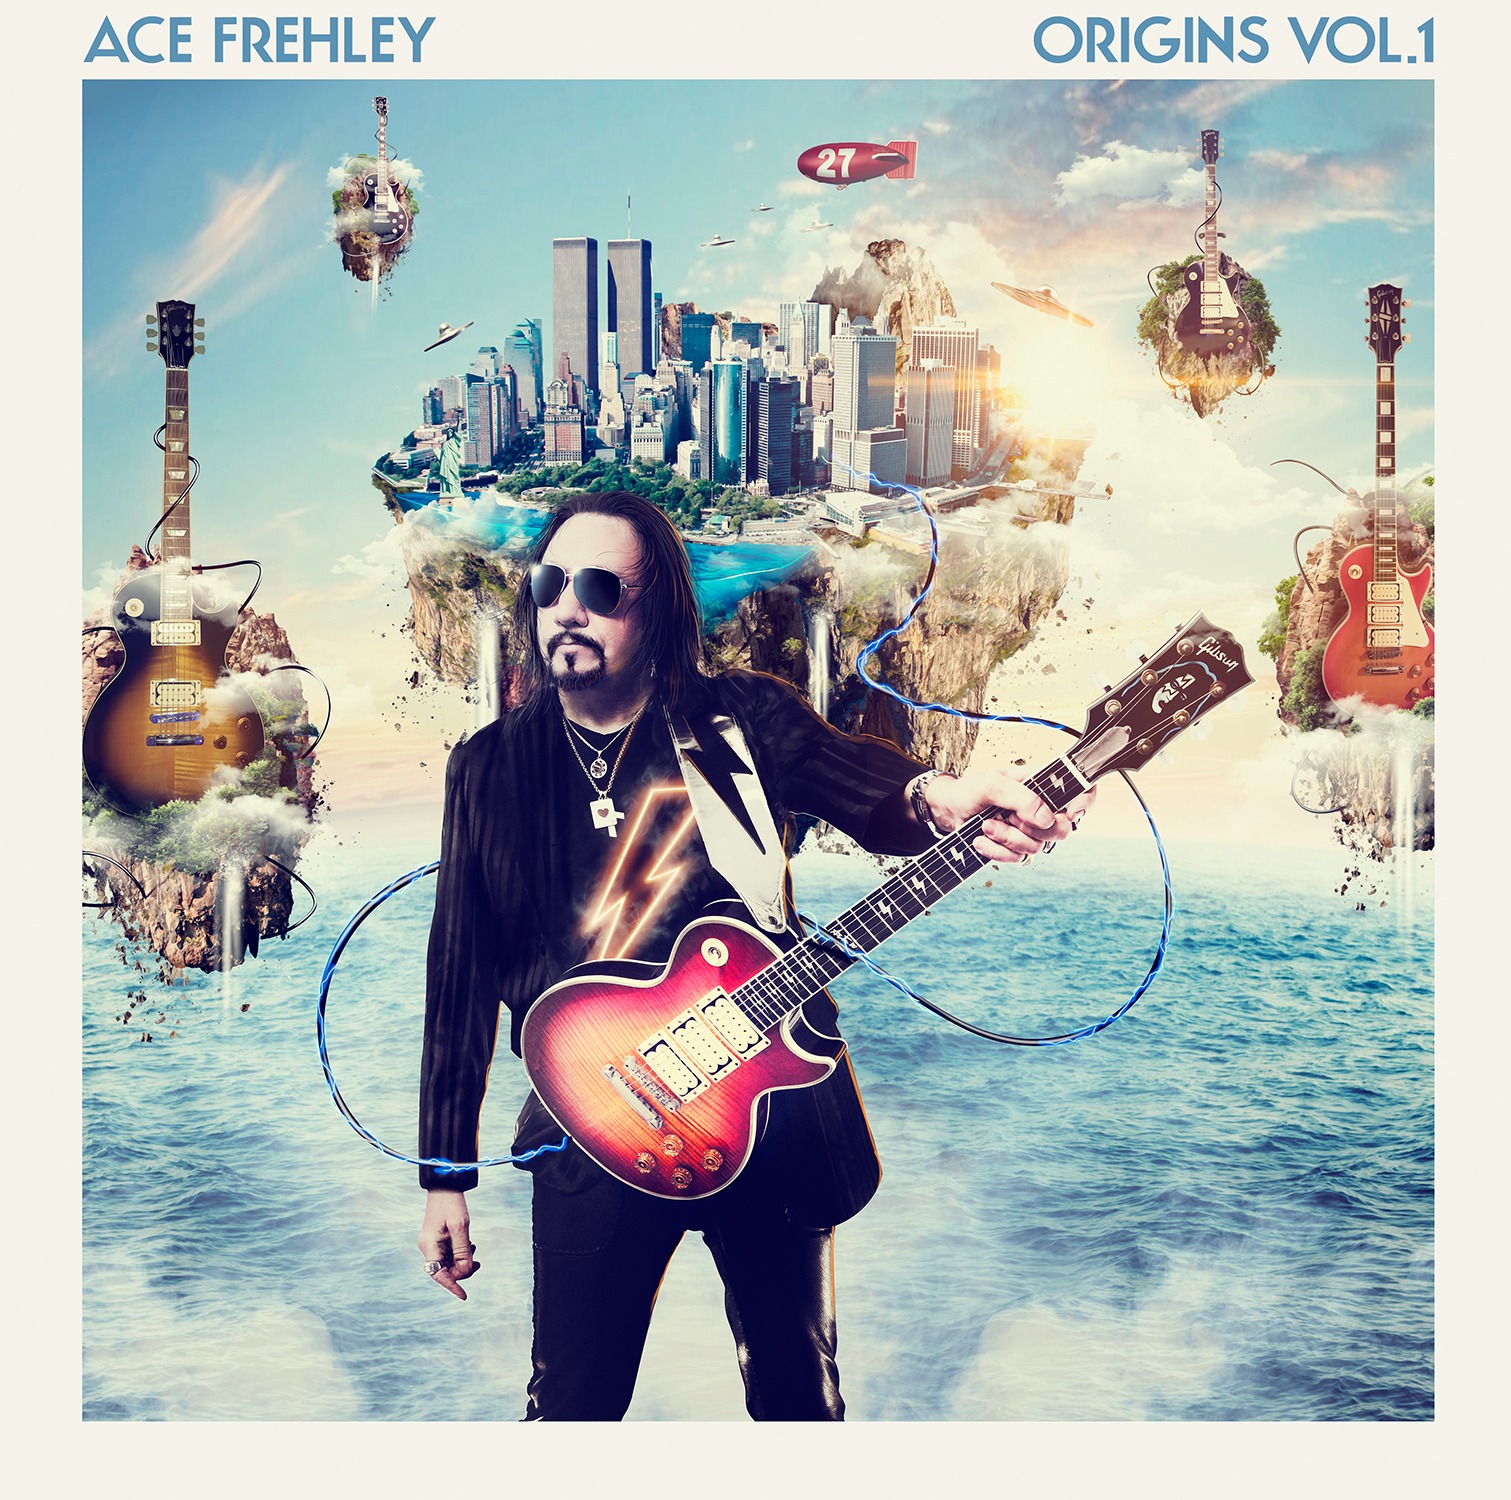 Ace Frehley "Origins Vol. 1" out 4/15/16